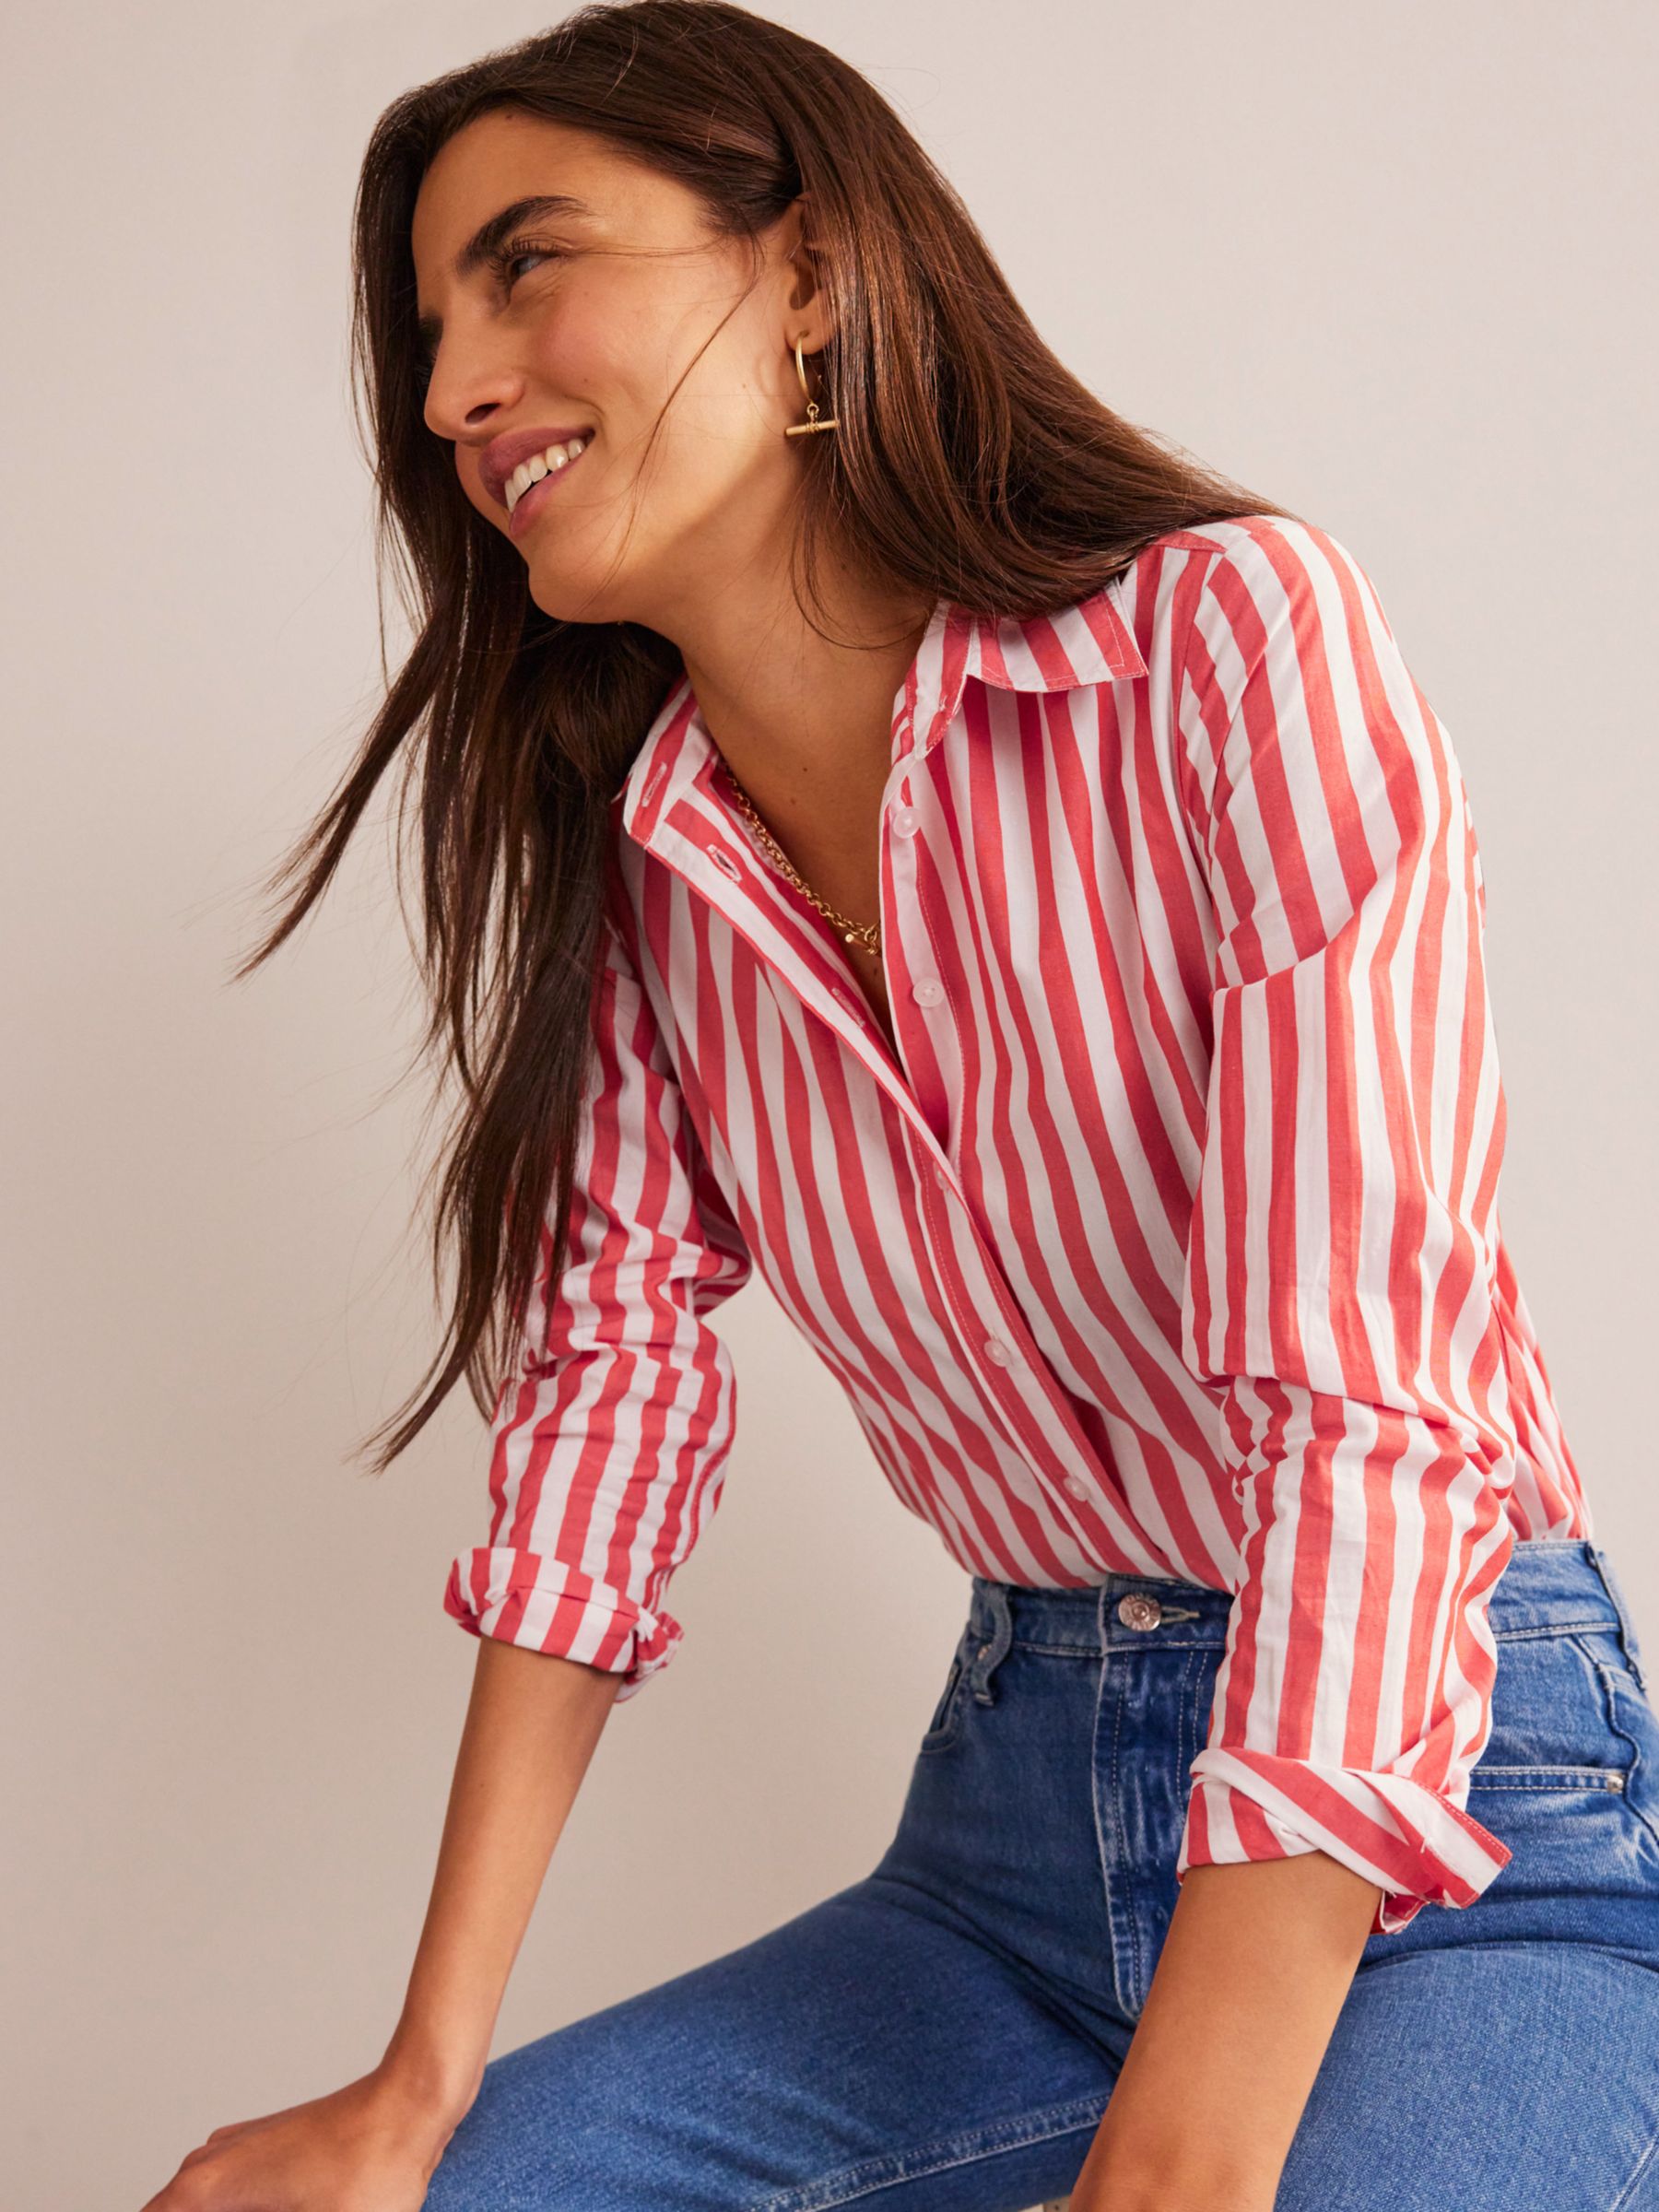 Boden Sienna Striped Cotton Shirt, Red/White at John Lewis & Partners